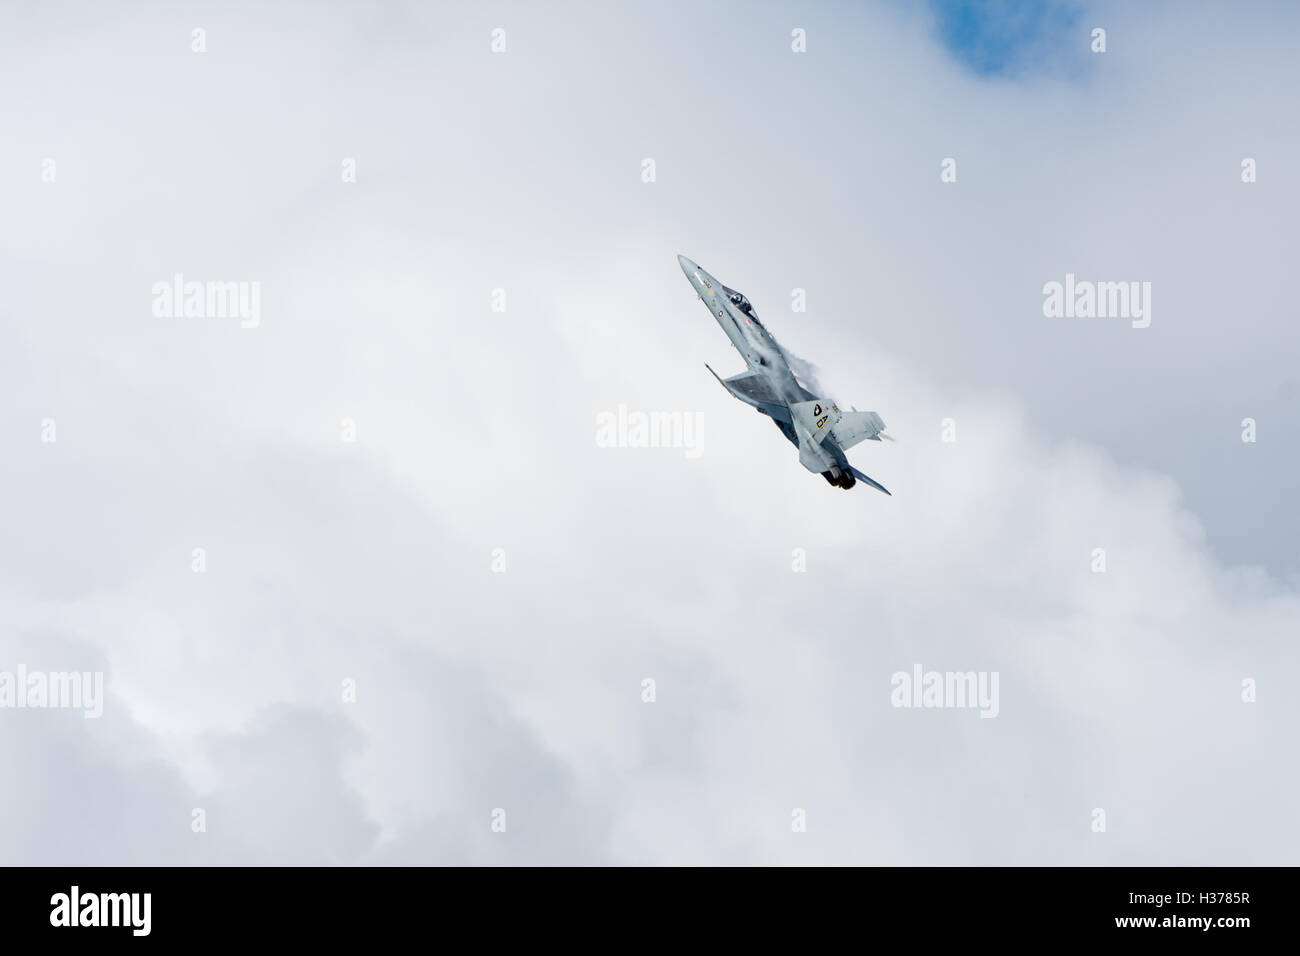 McDonnell Douglas F/A-18 Hornet twin-engine supersonic all-weather carrier-capable multirole combat jet Stock Photo